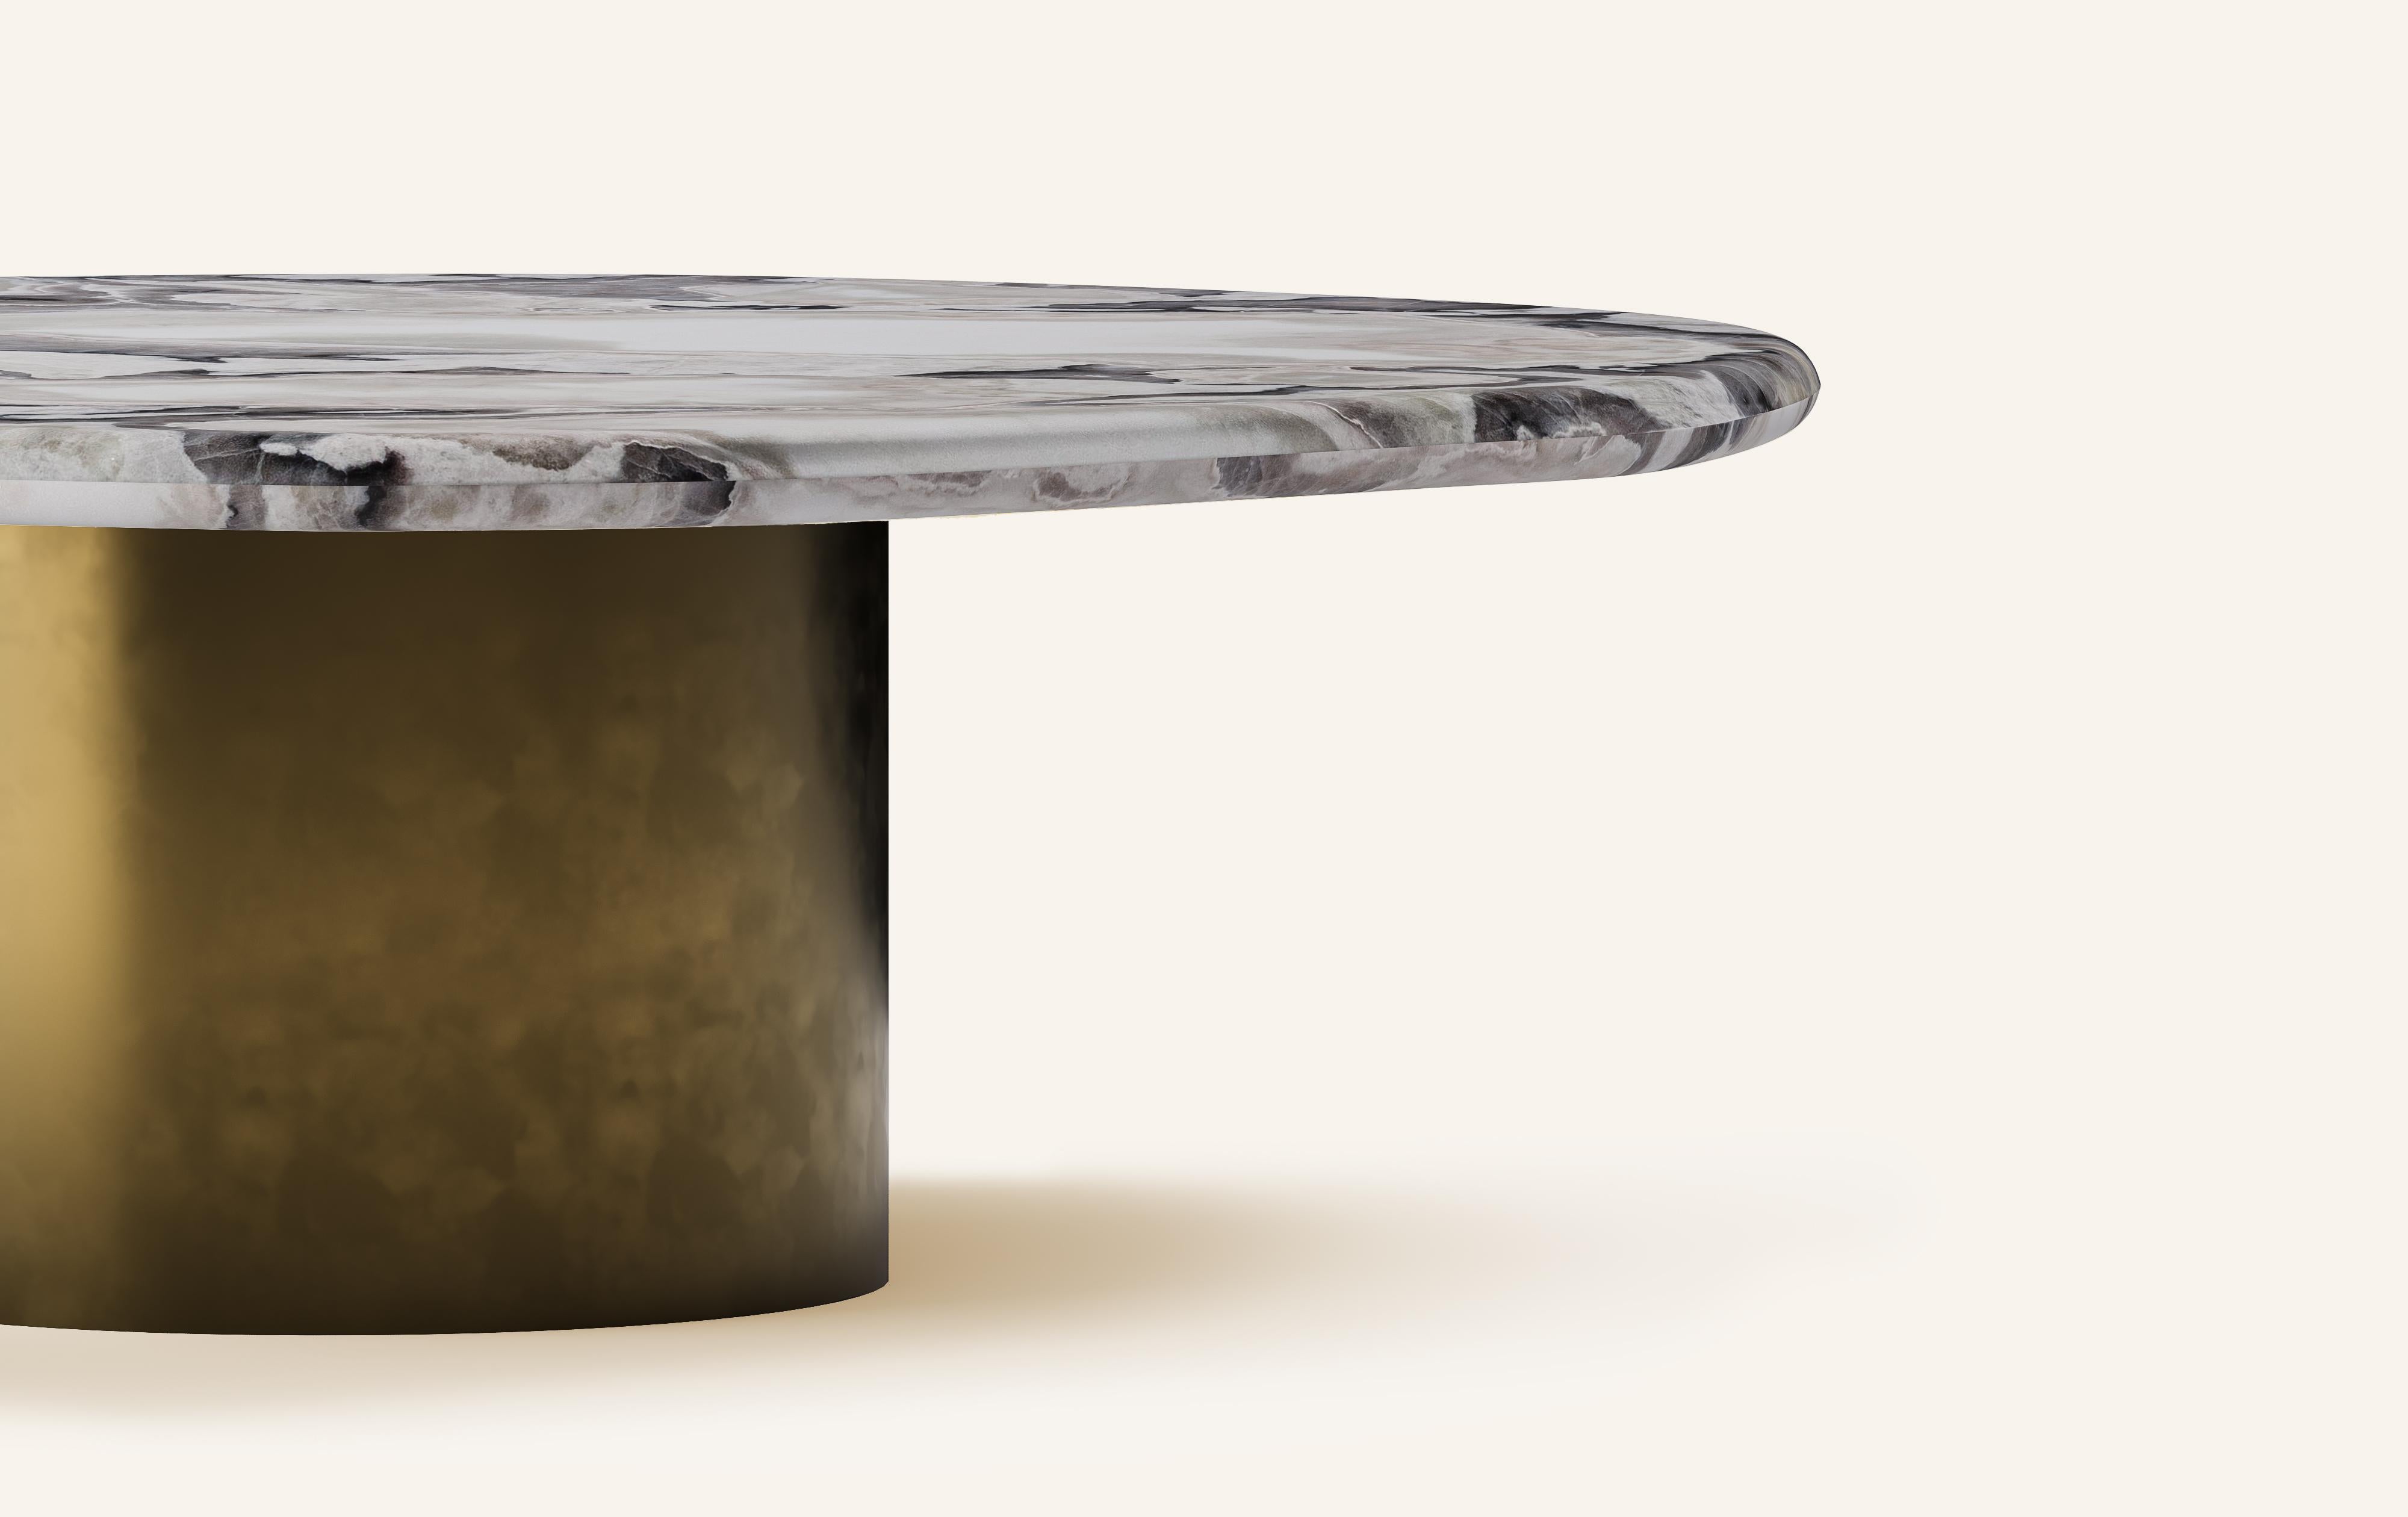 Organic Modern FORM(LA) Lago Round Coffee Table 60”L x 60”W x 14”H Oyster Marble & Bronze For Sale